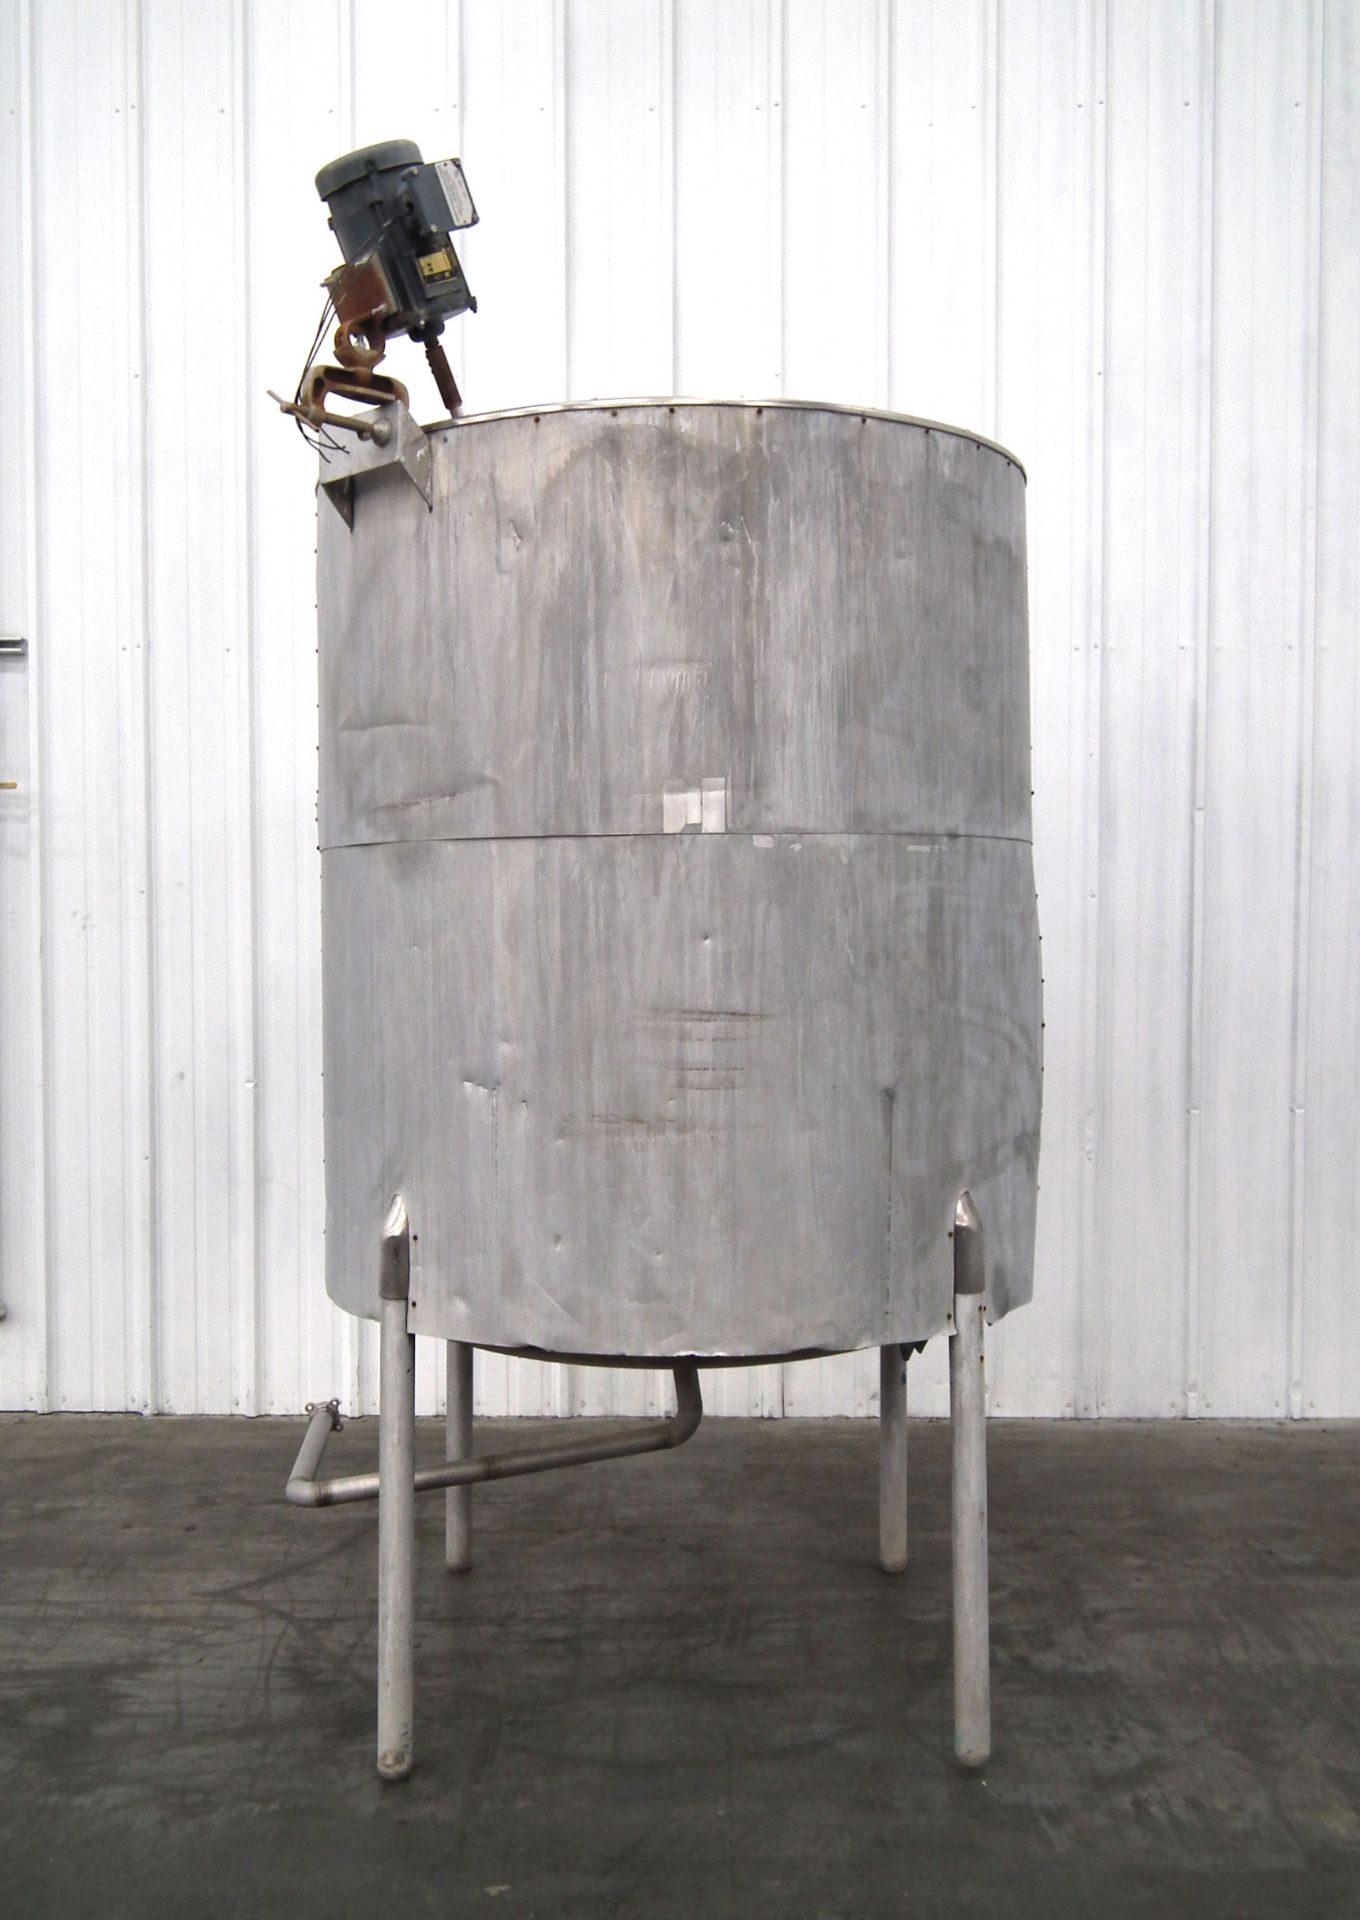 Insulated Mixing Tank with 565 Gallons Capacity A2263 - Image 2 of 7